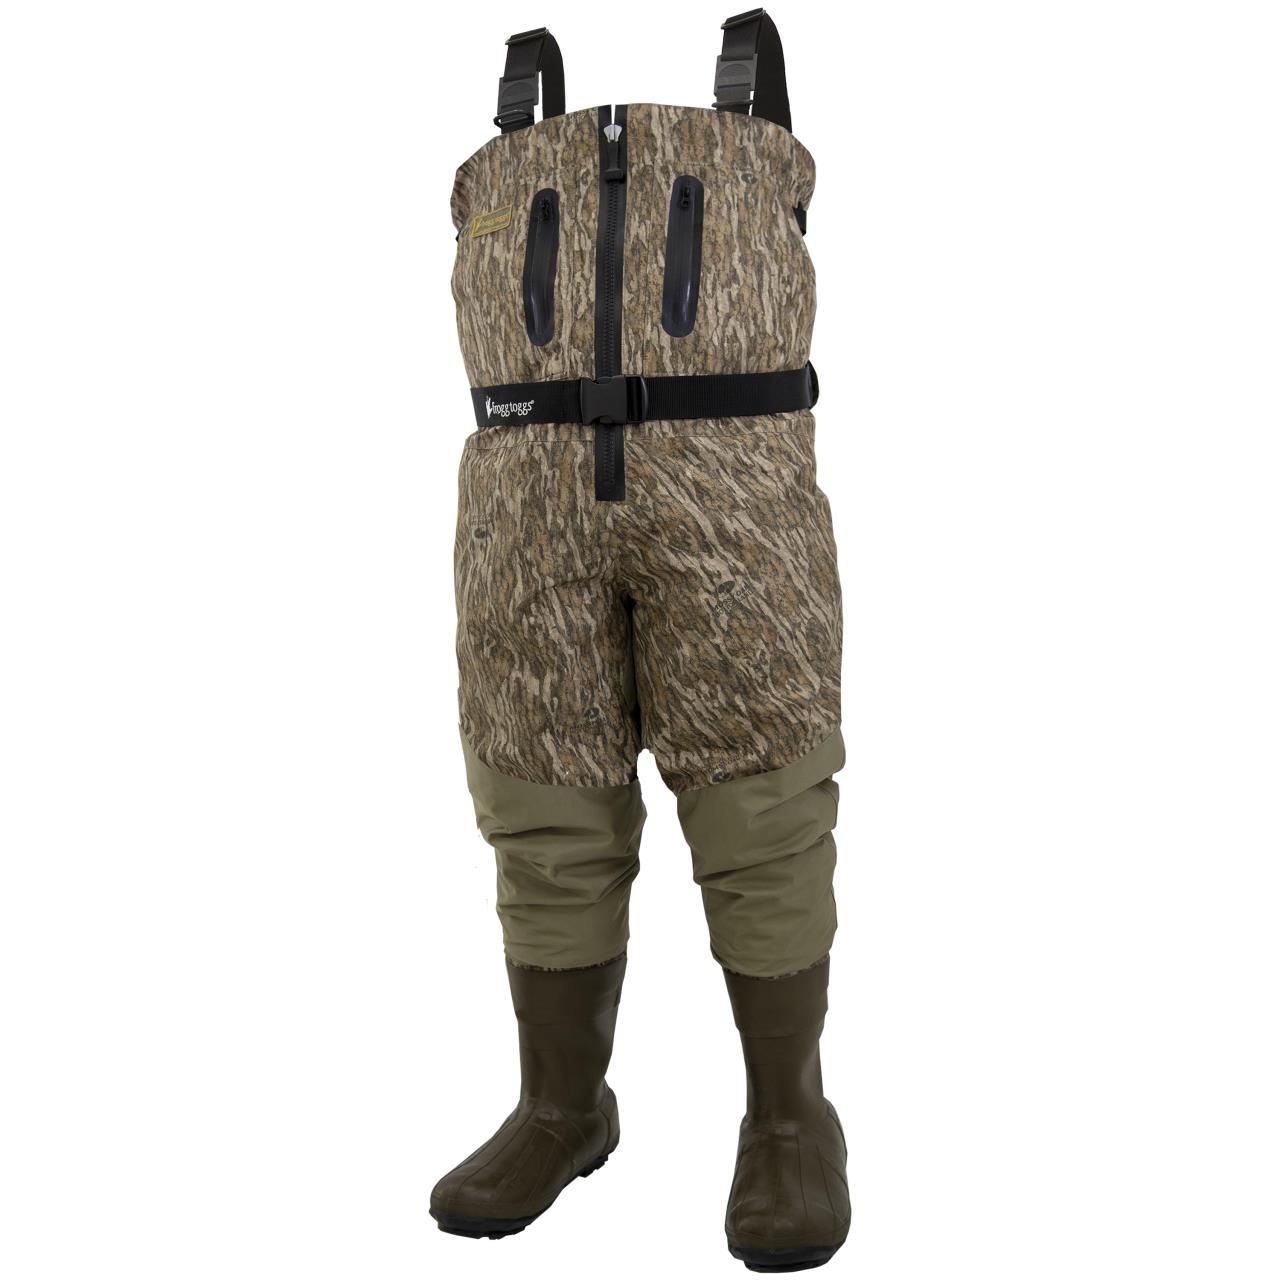 frogg-toggs-chest-waders.jpg